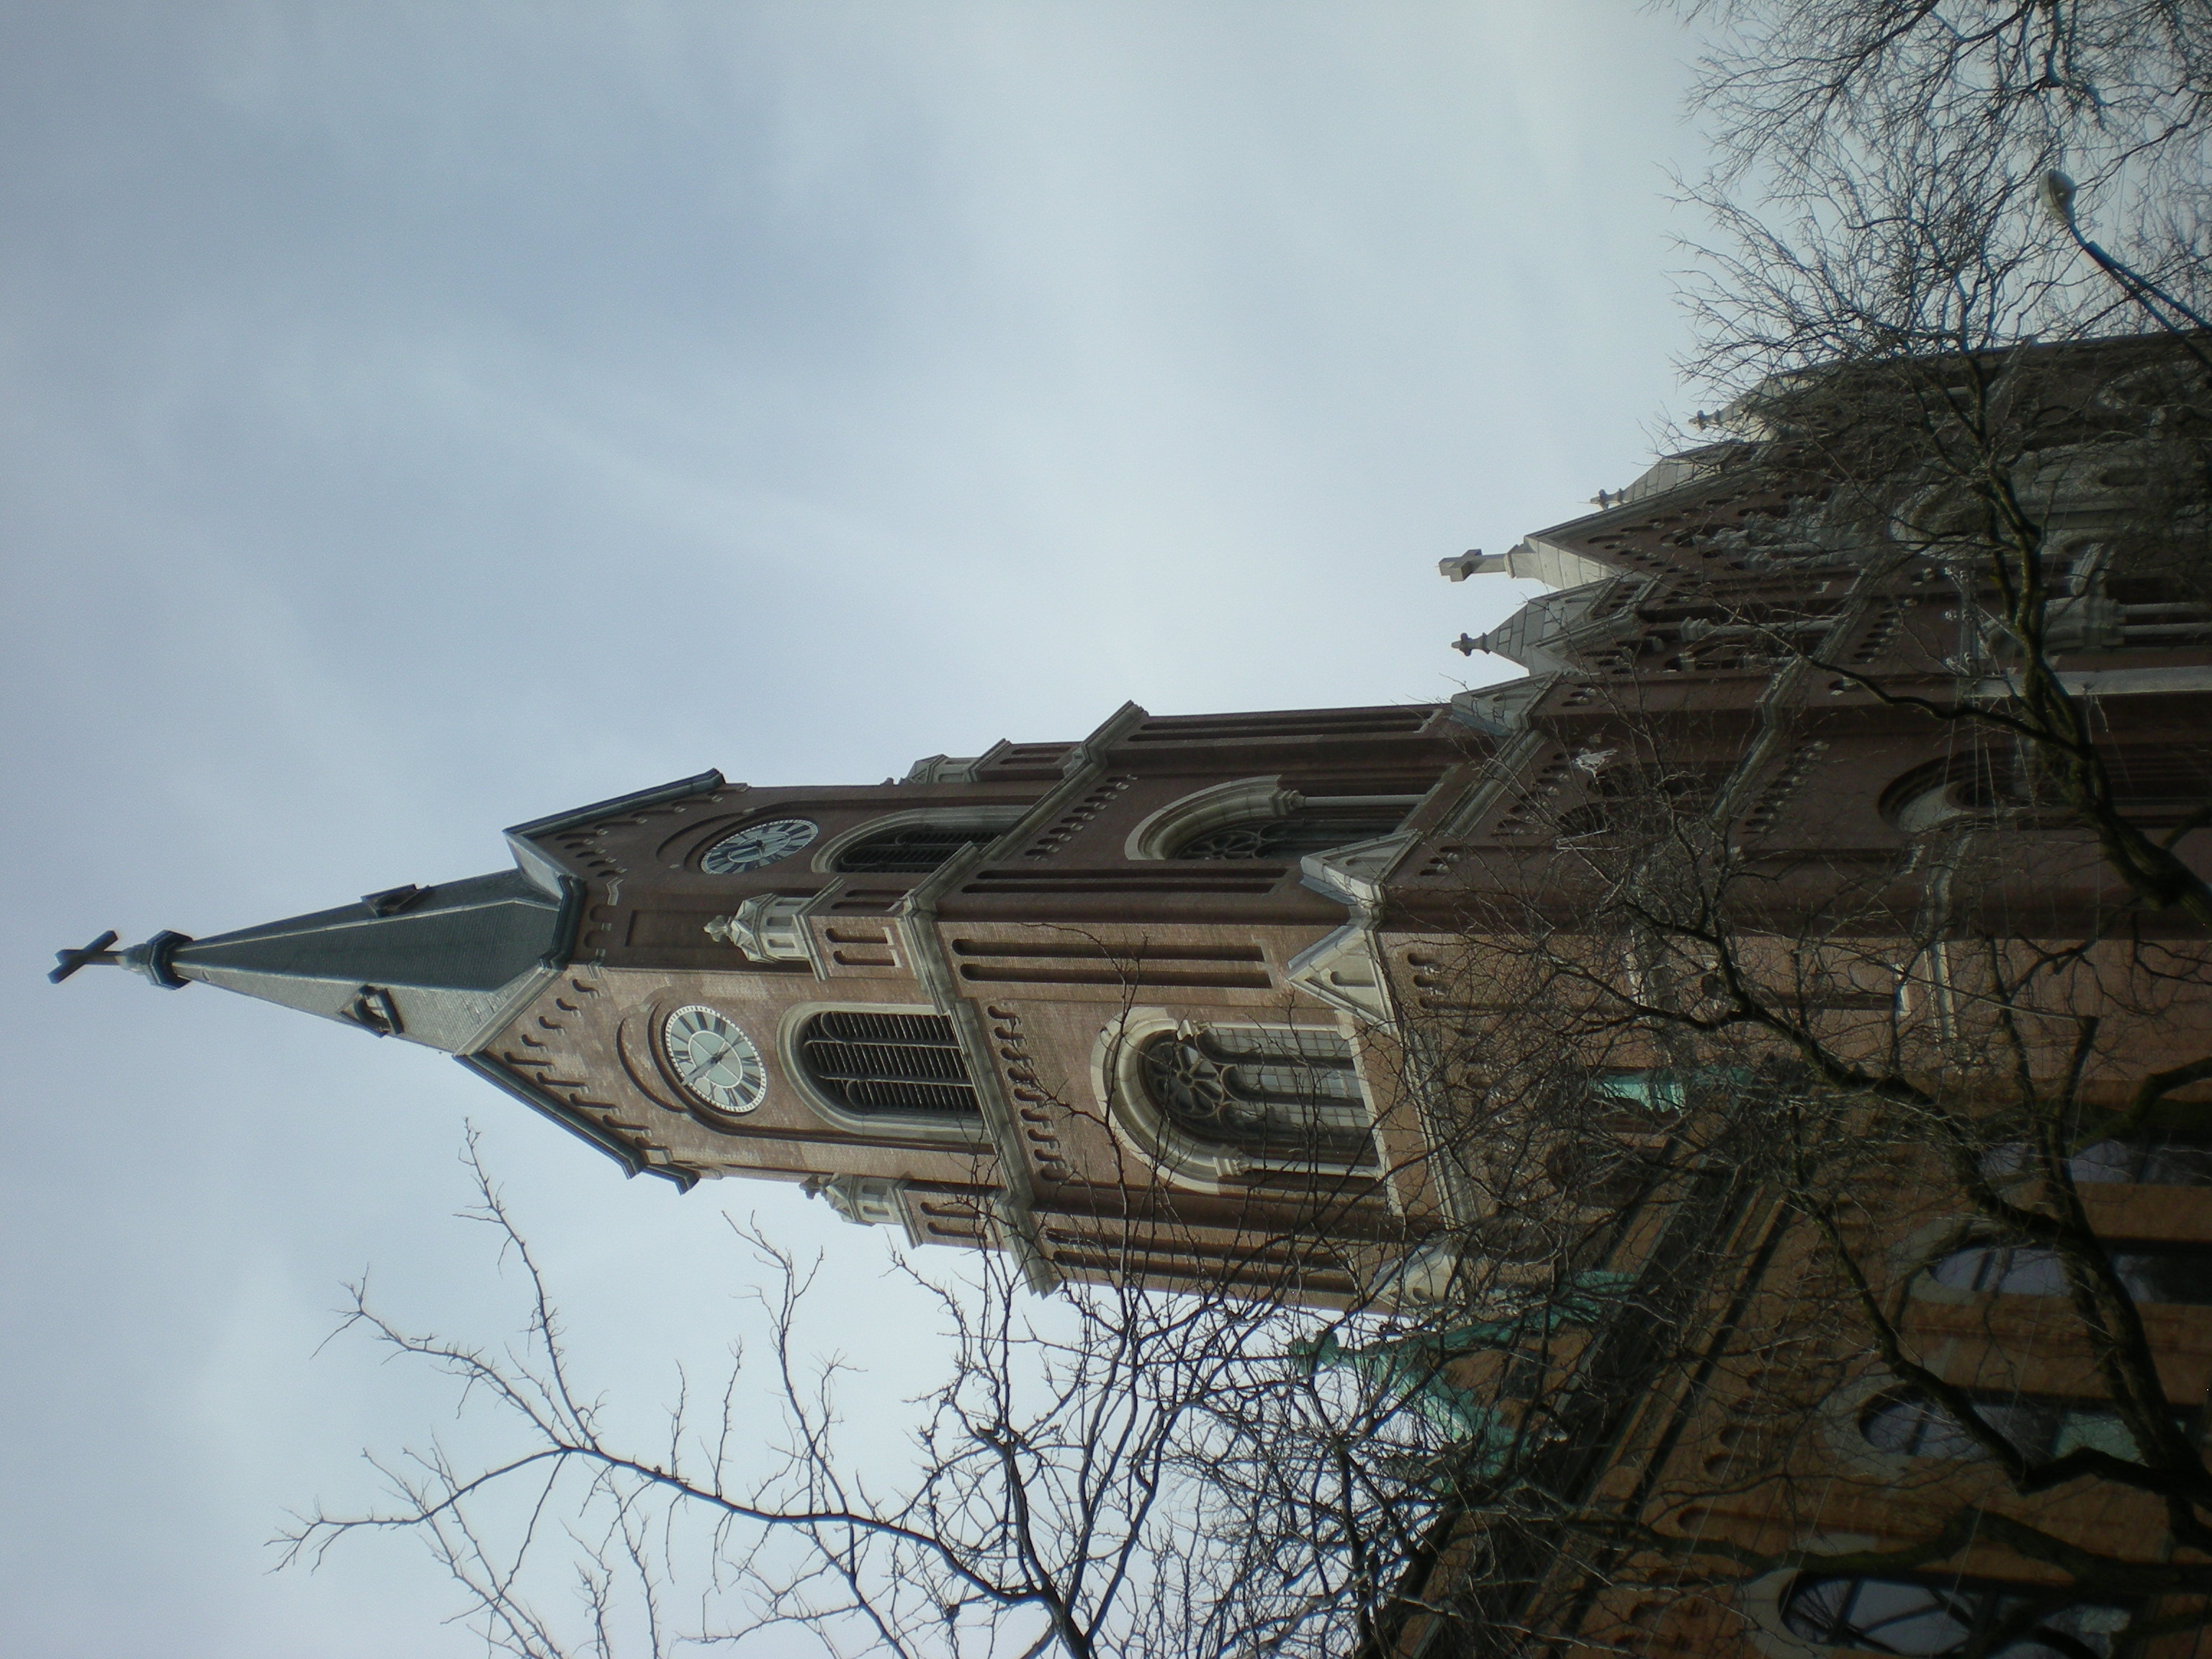 St. Michael's, Old Town, Chicago